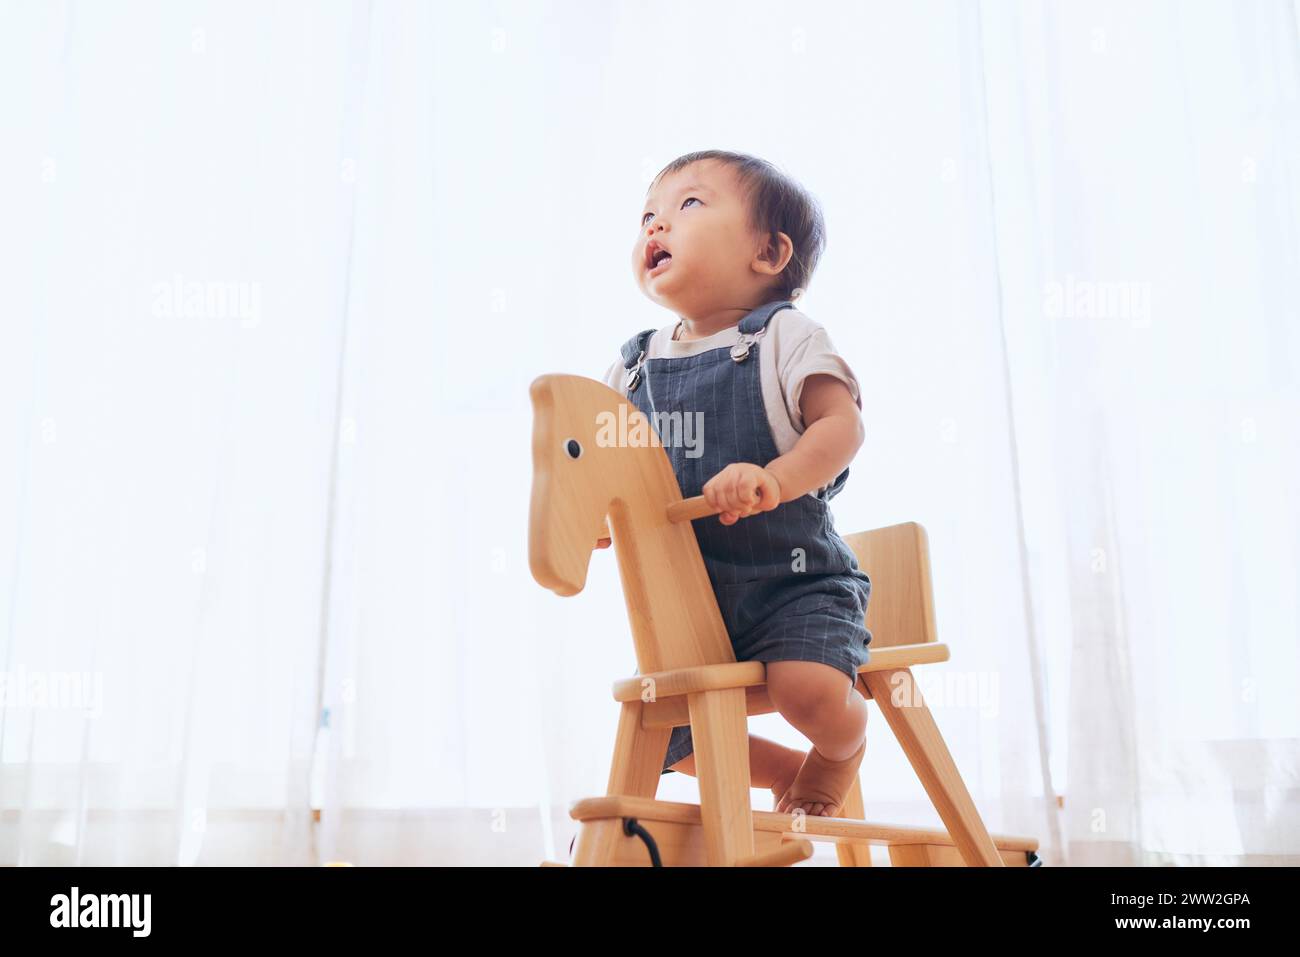 A baby riding a wooden horse in a room Stock Photo